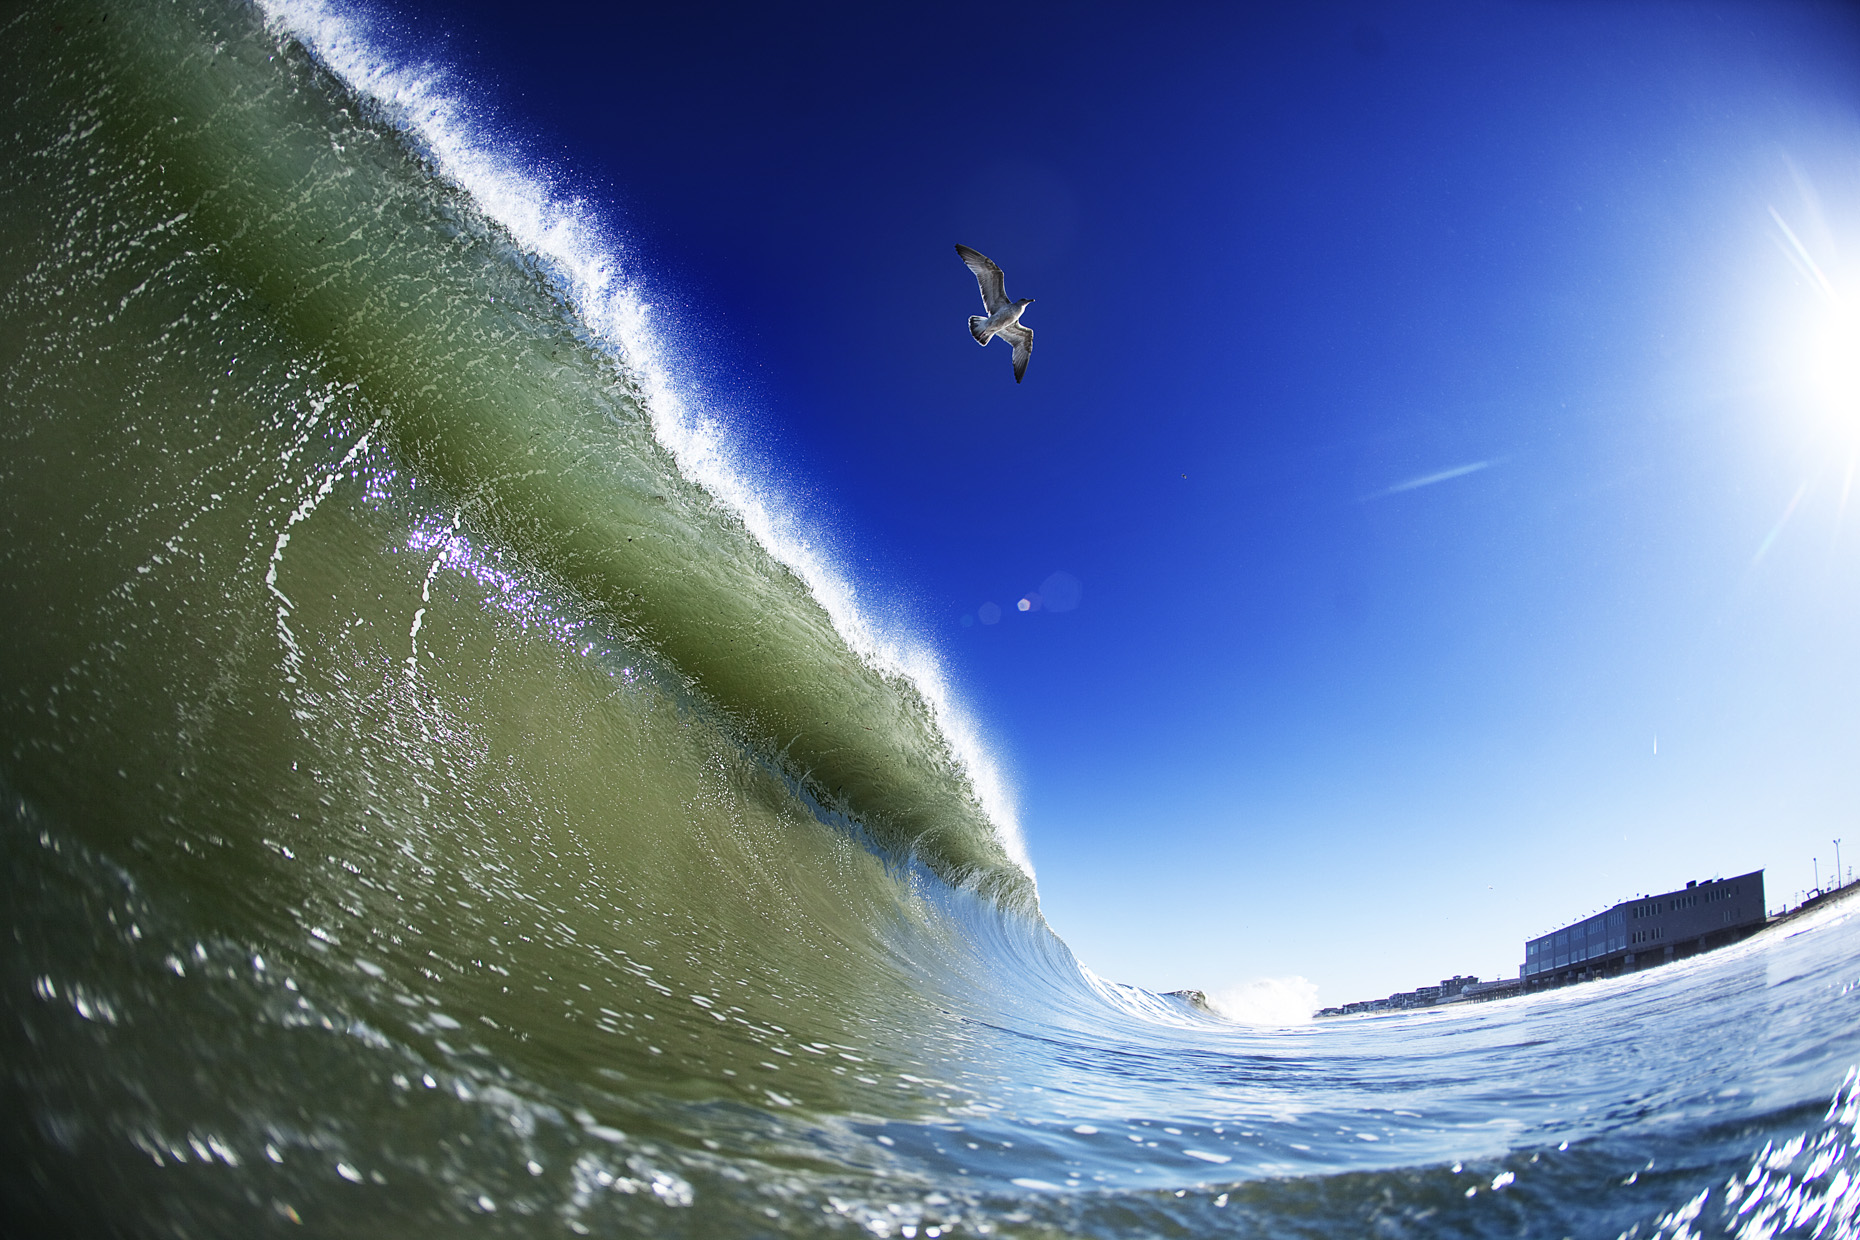 gull over wave from the water by New Hampshire based commercial outdoor lifestyle photographer Brian Nevins